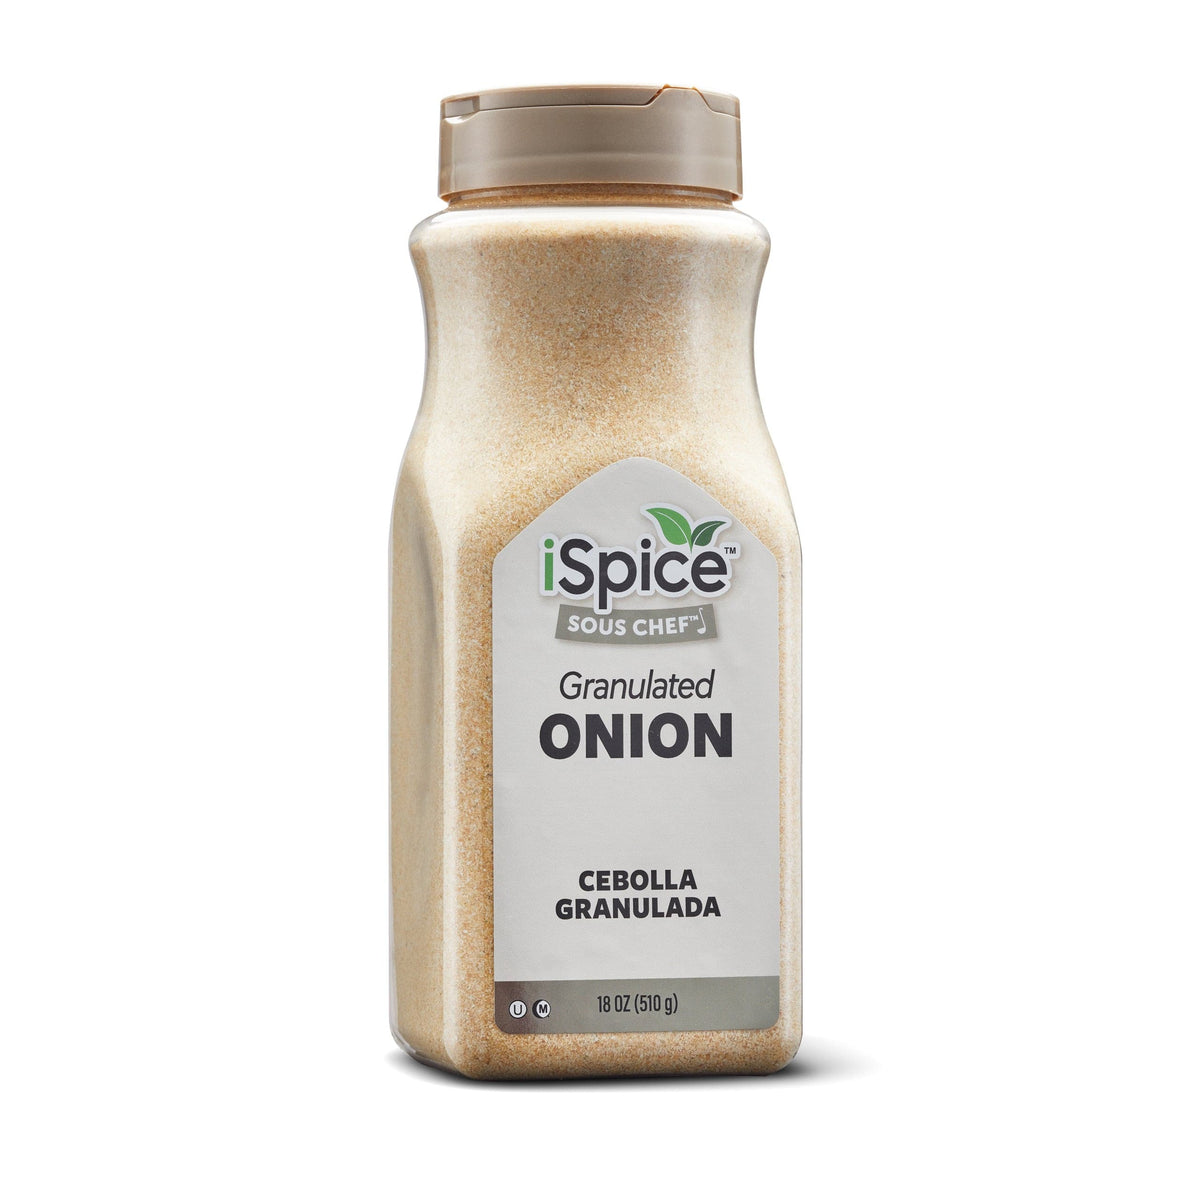 Discover the flavorful and aromatic experience of Onion Granulated! With its deep flavor, onion granulated will add an amazing dimension to your dishes.